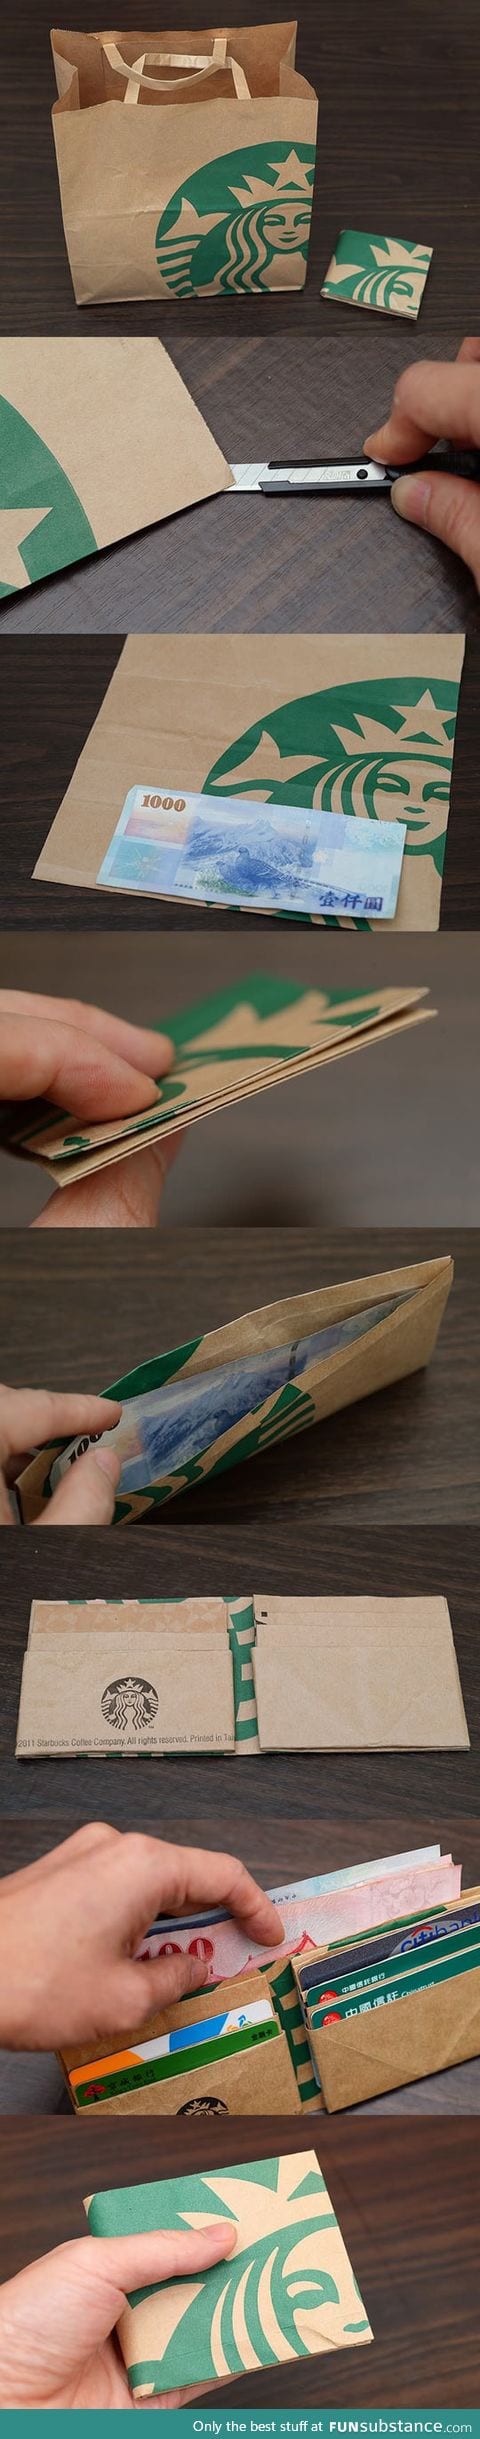 Turn a starbucks paper bag into a wallet